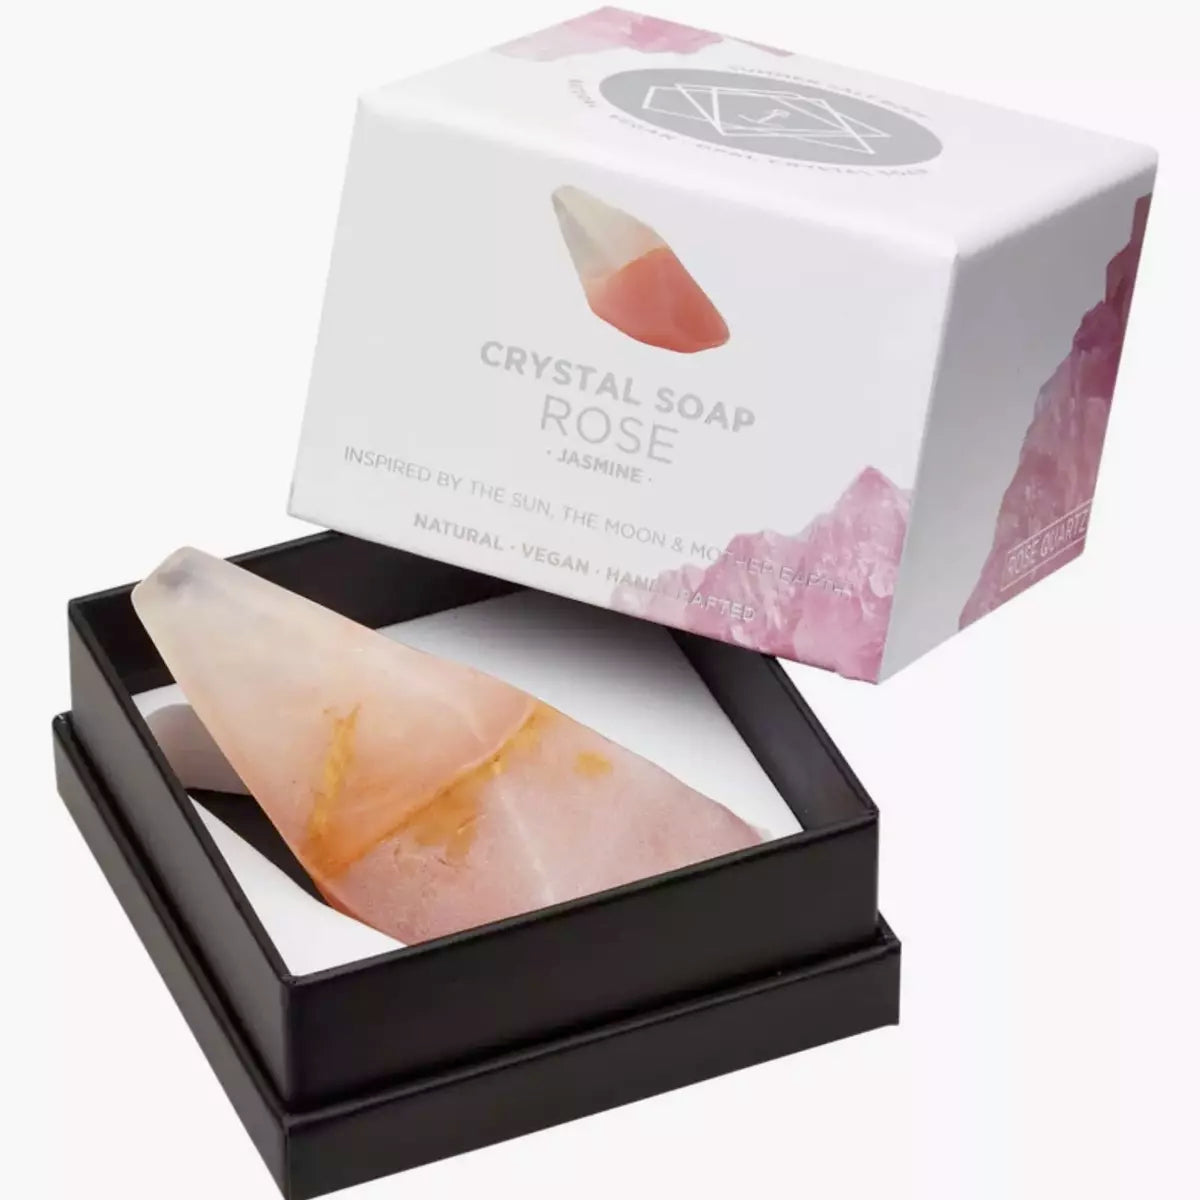 Summer Salt Body's Crystal Soap - ROSE QUARTZ - Jasmine in a Box, perfect for self-love and healing.